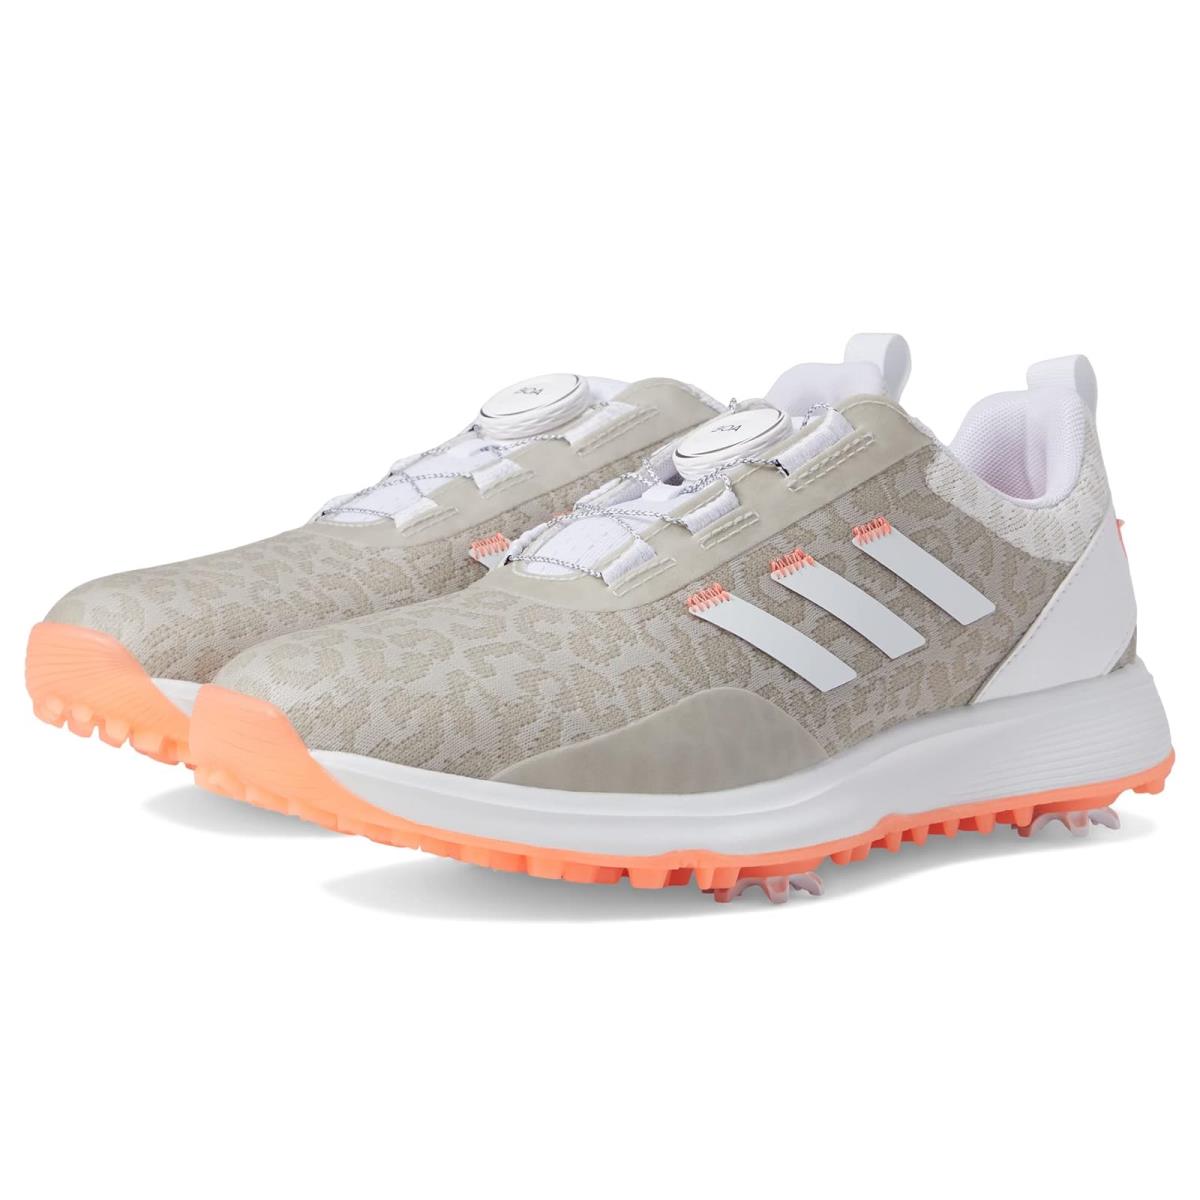 Woman`s Sneakers Athletic Shoes Adidas Golf S2G 23 Boa Golf Shoes Footwear White/Footwear White/Coral Fusion